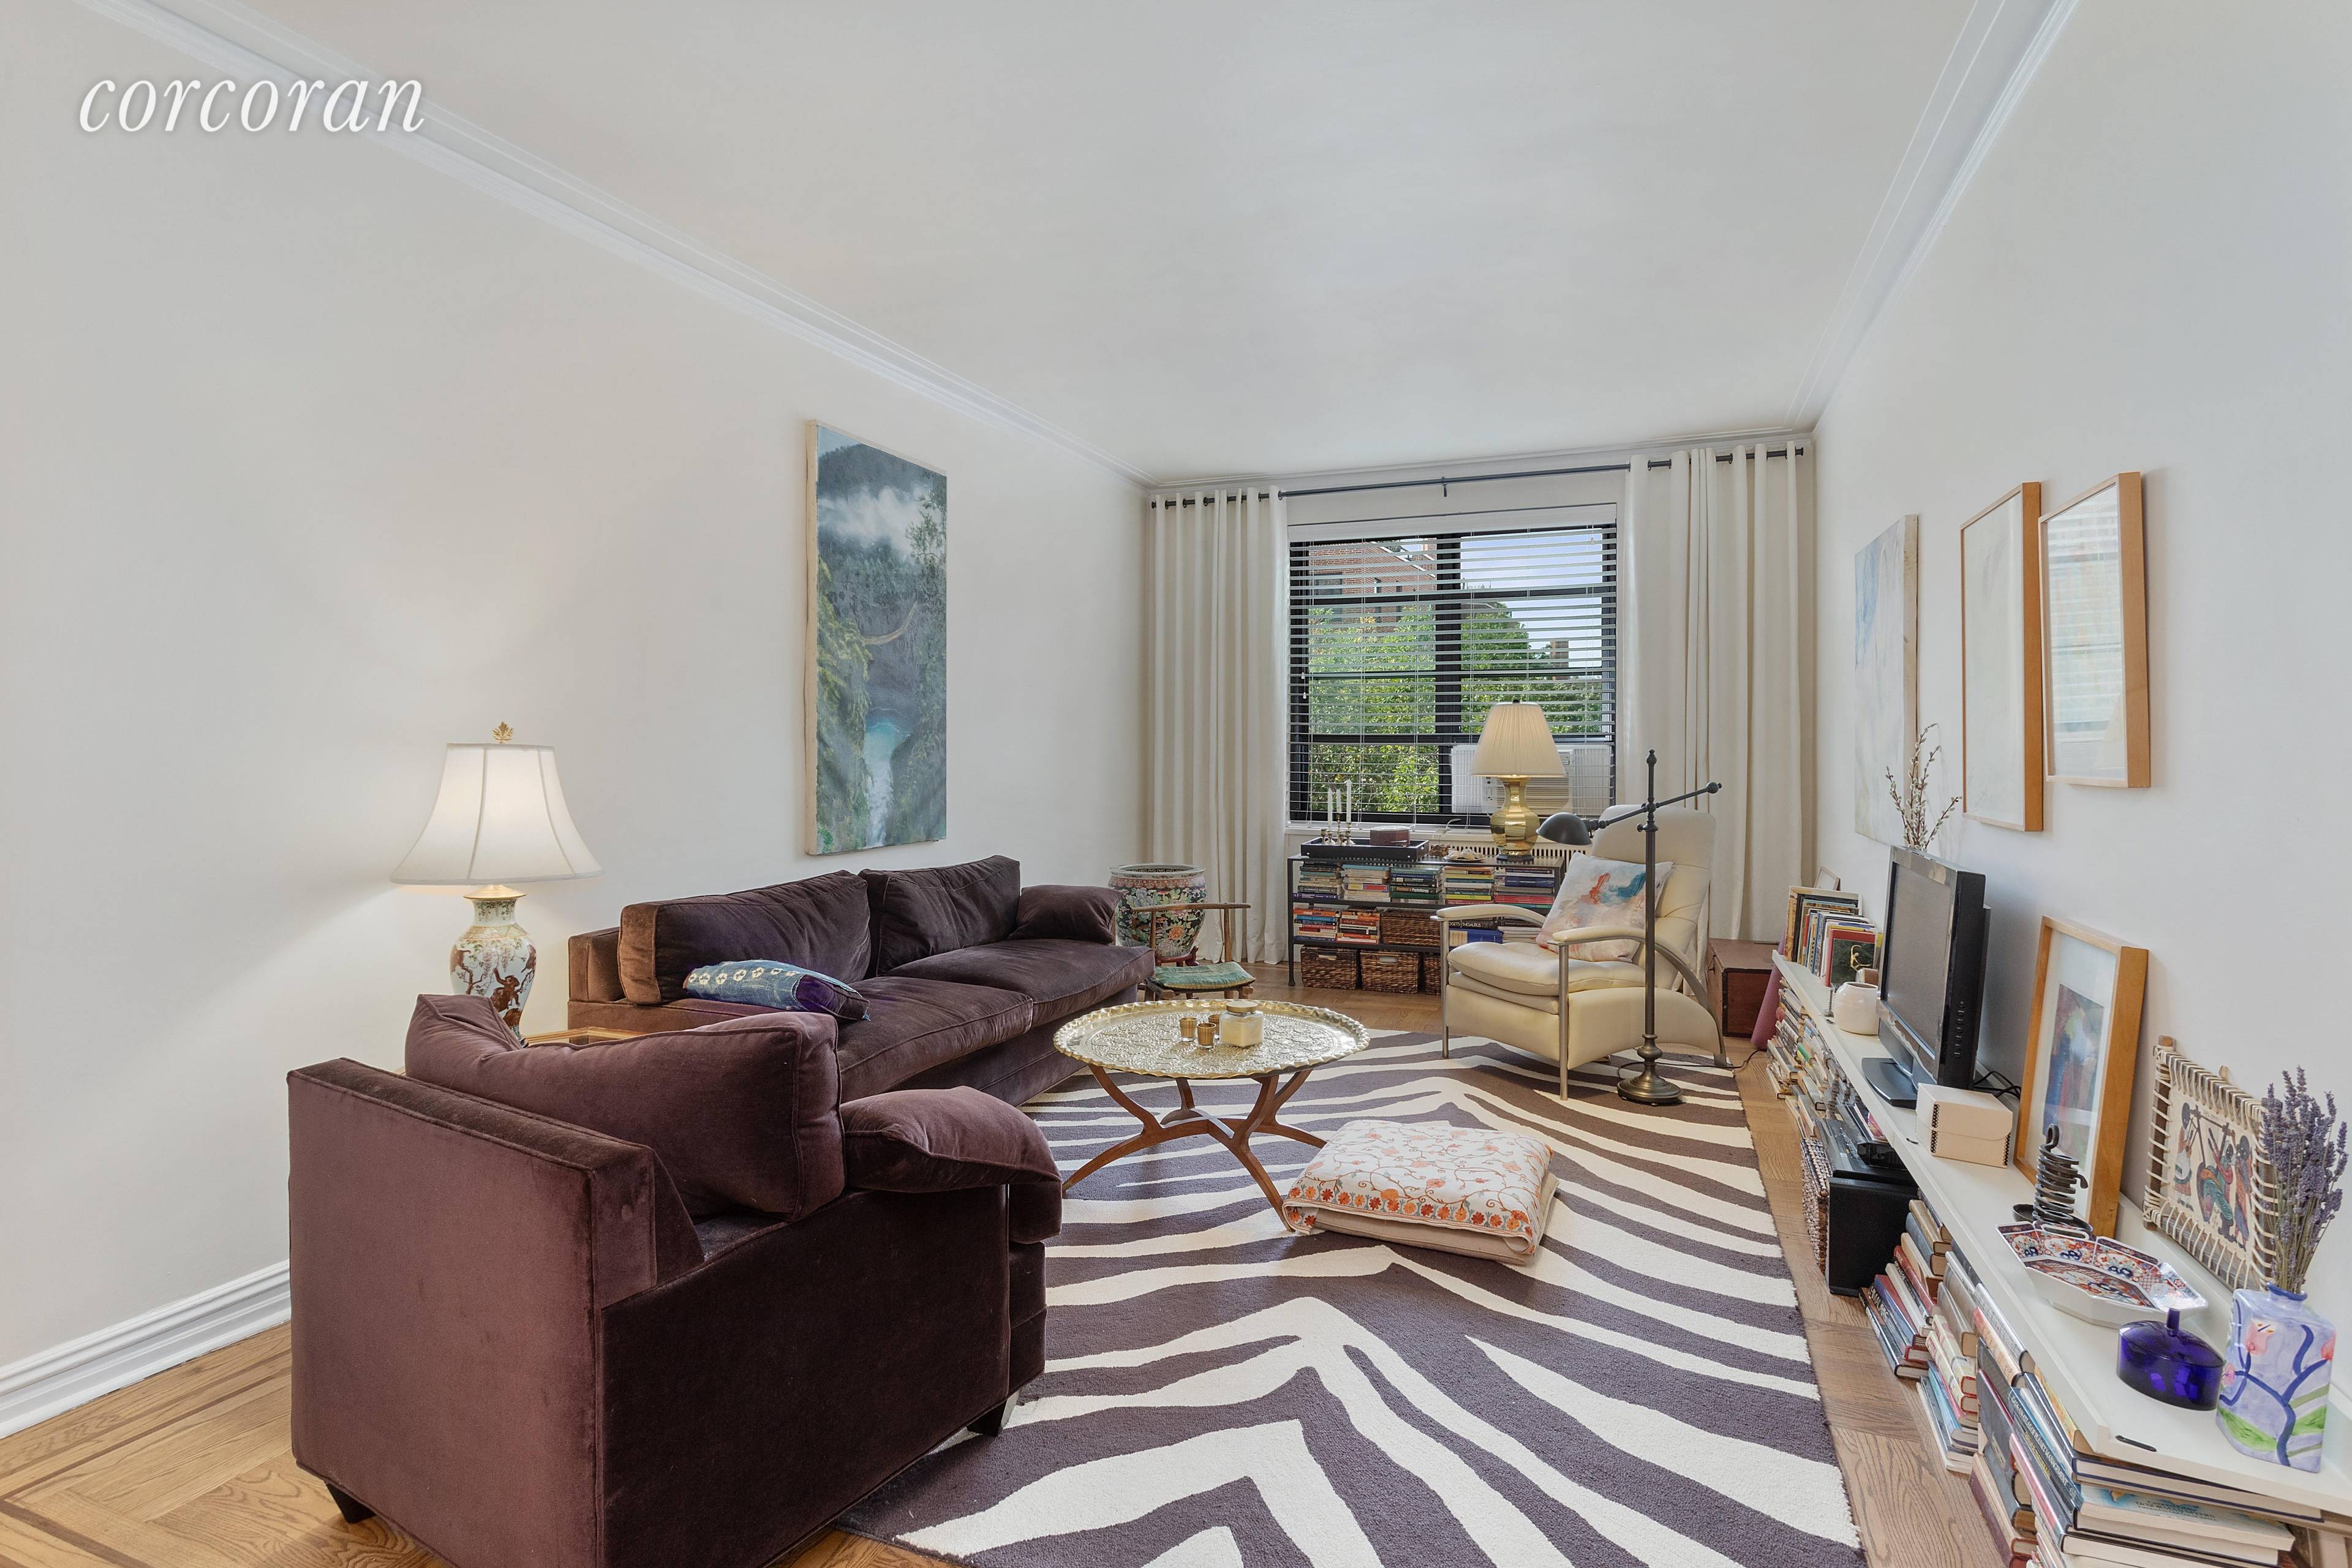 The Embassy, one of Inwood's most elegant Beaux Art Buildings, now has a one bedroom, one Bathroom apartment on the market.